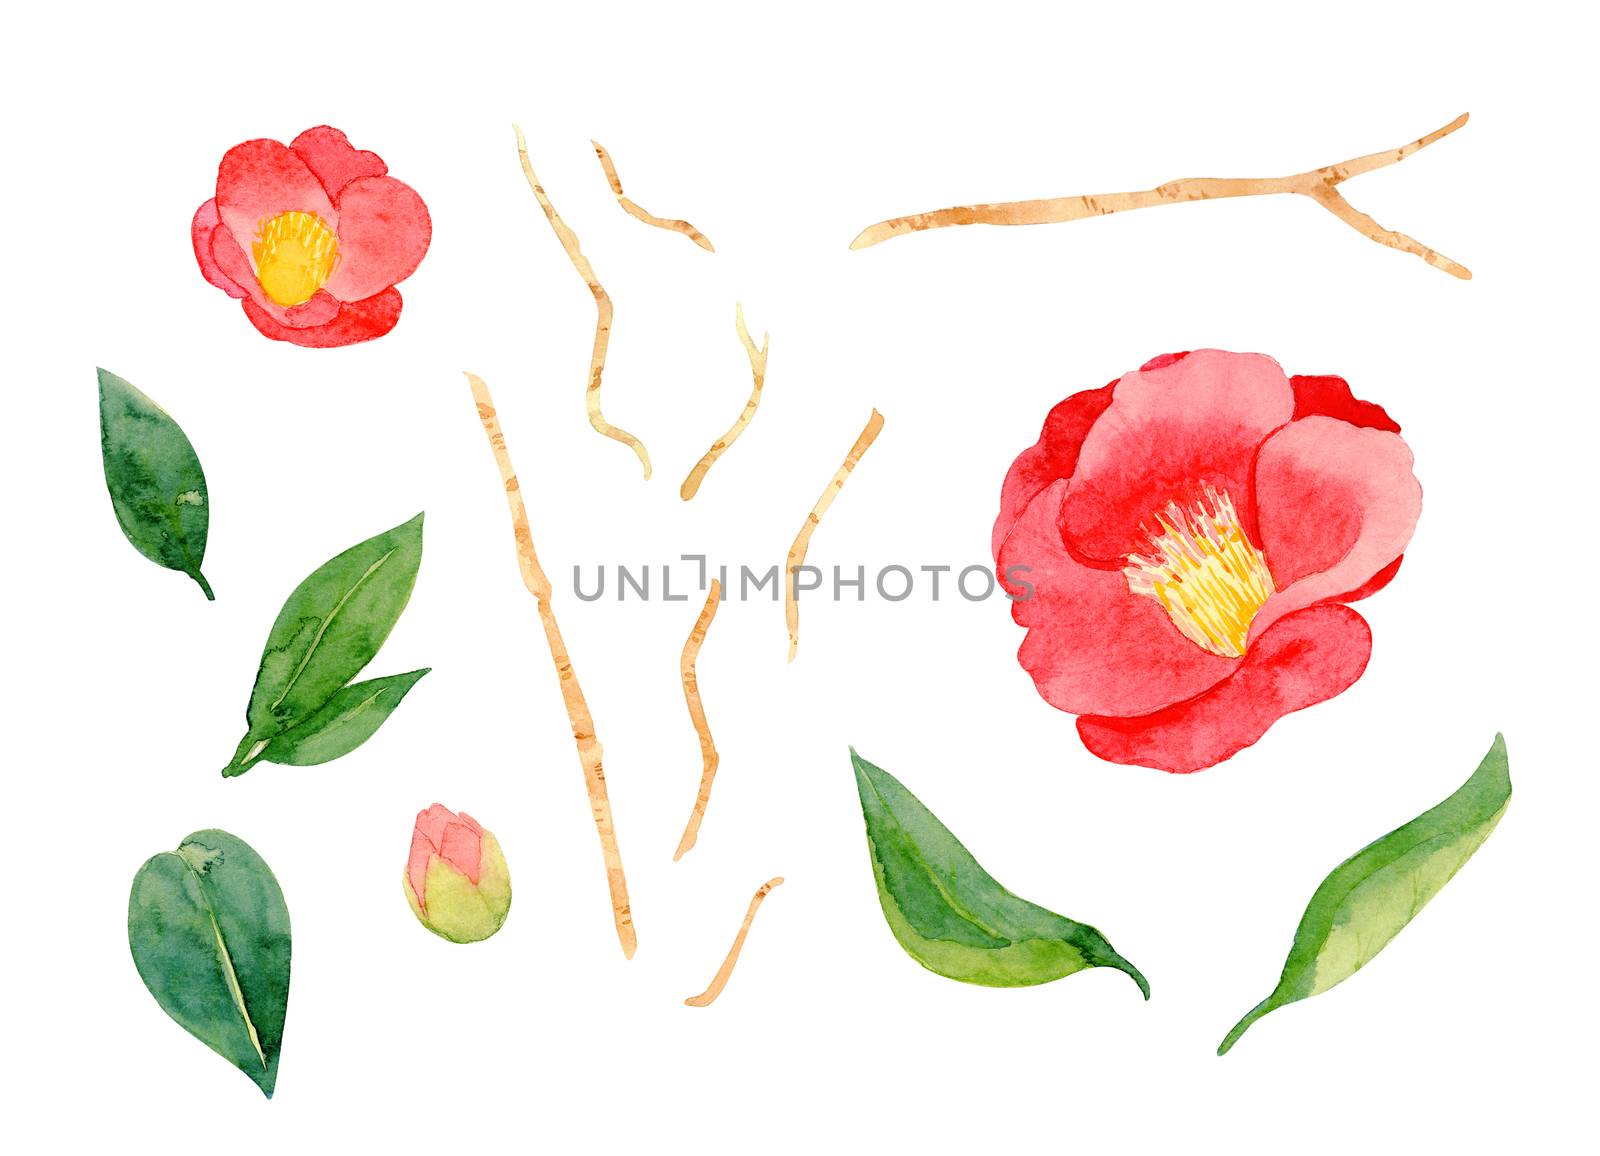 red camellia japonica flower and leaves isolated on white background. Japanese tsubaki. Symbol of love. Watercolor hand painting illustration.